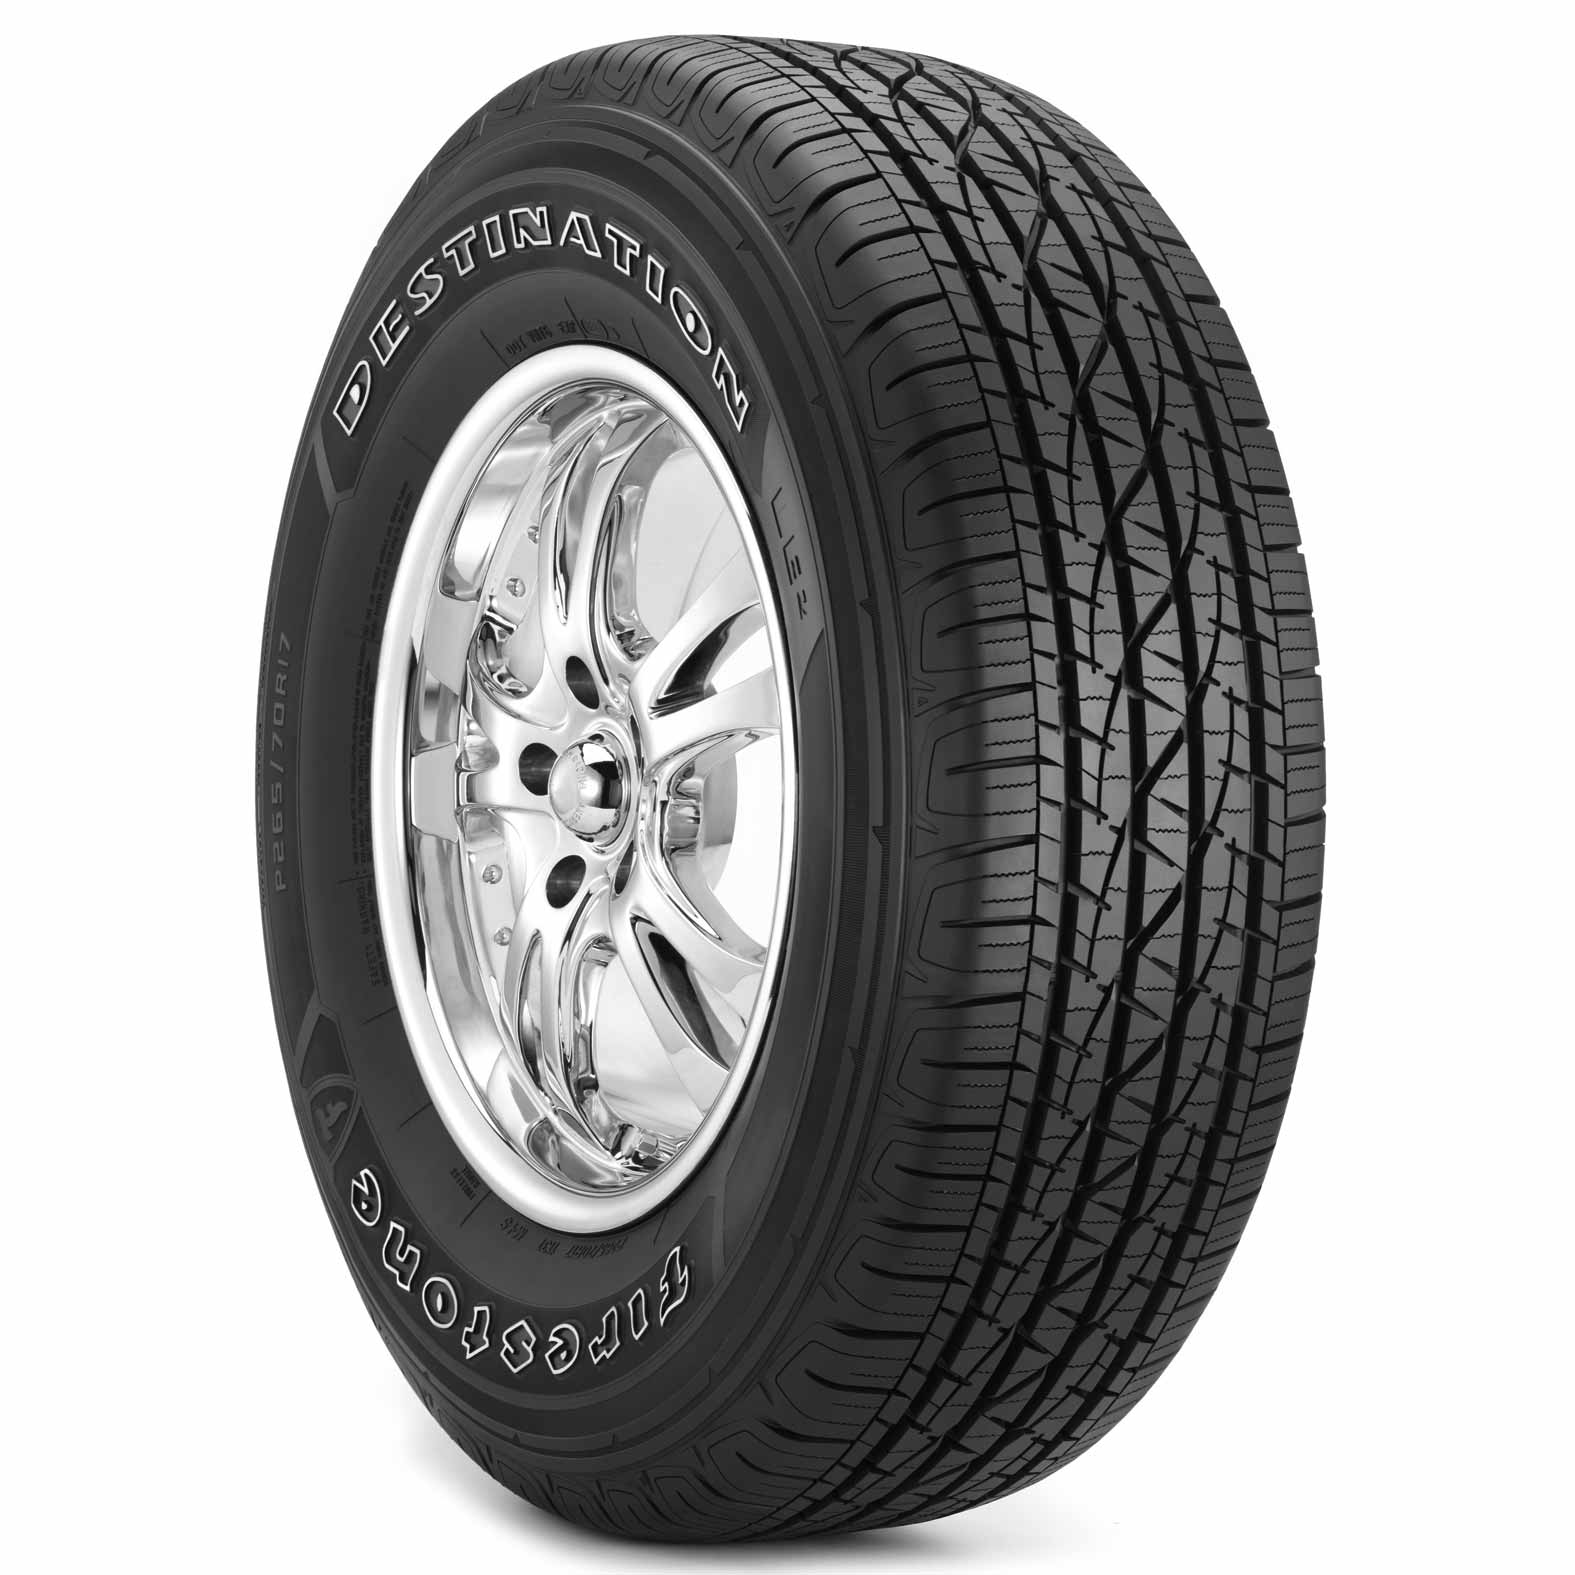 Are Firestone Destination Tires Any Good